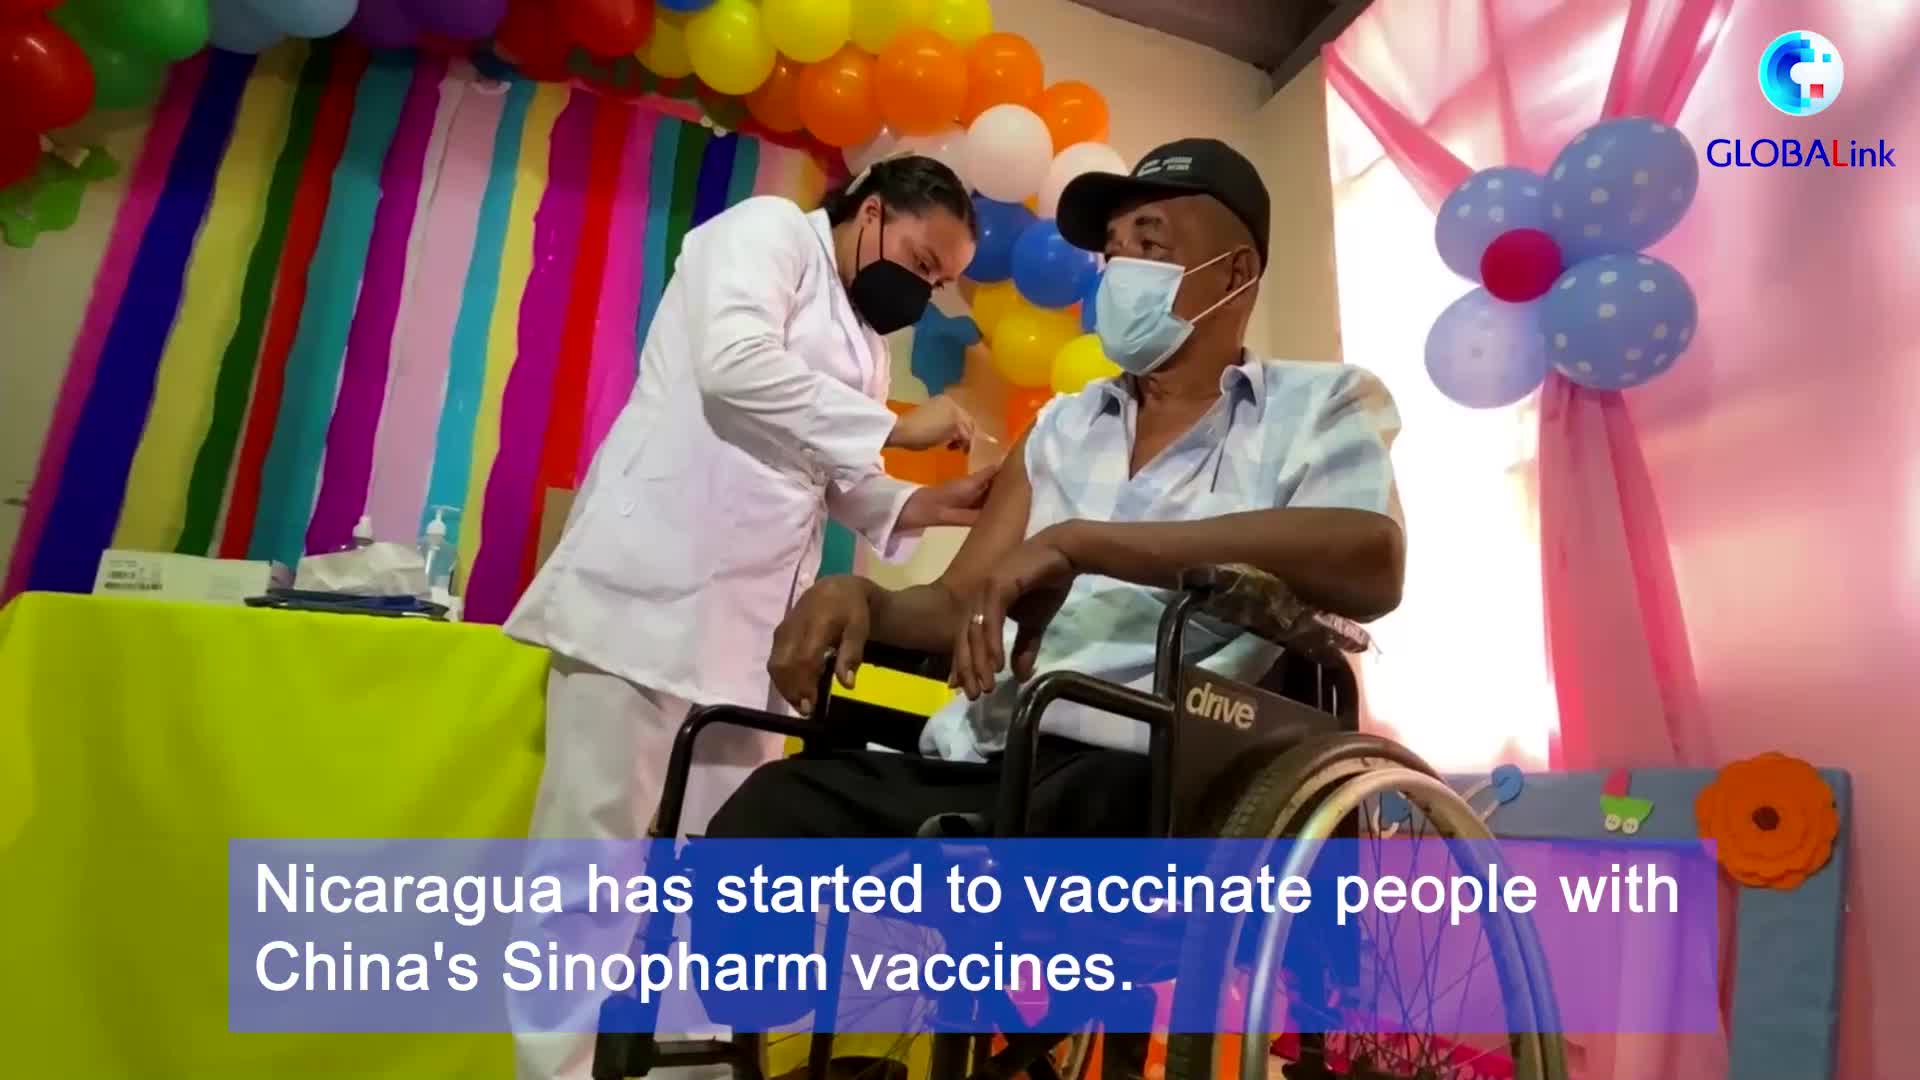 Nicaragua starts to vaccinate people with China's Sinopharm vaccines